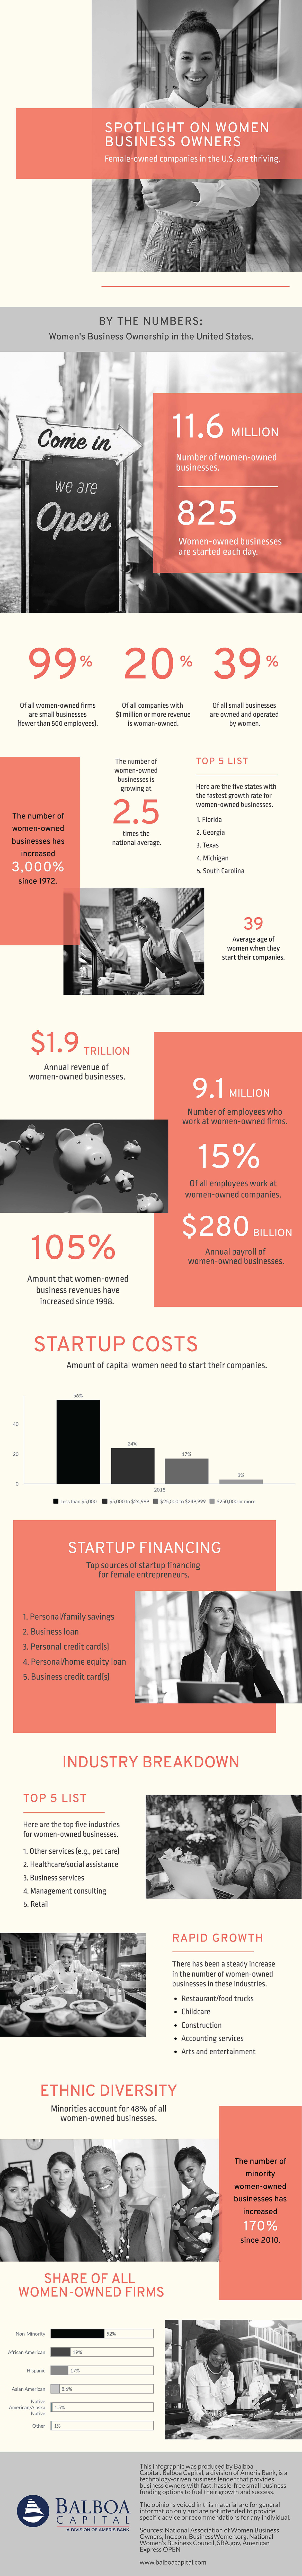 Women Business Owners Infographic